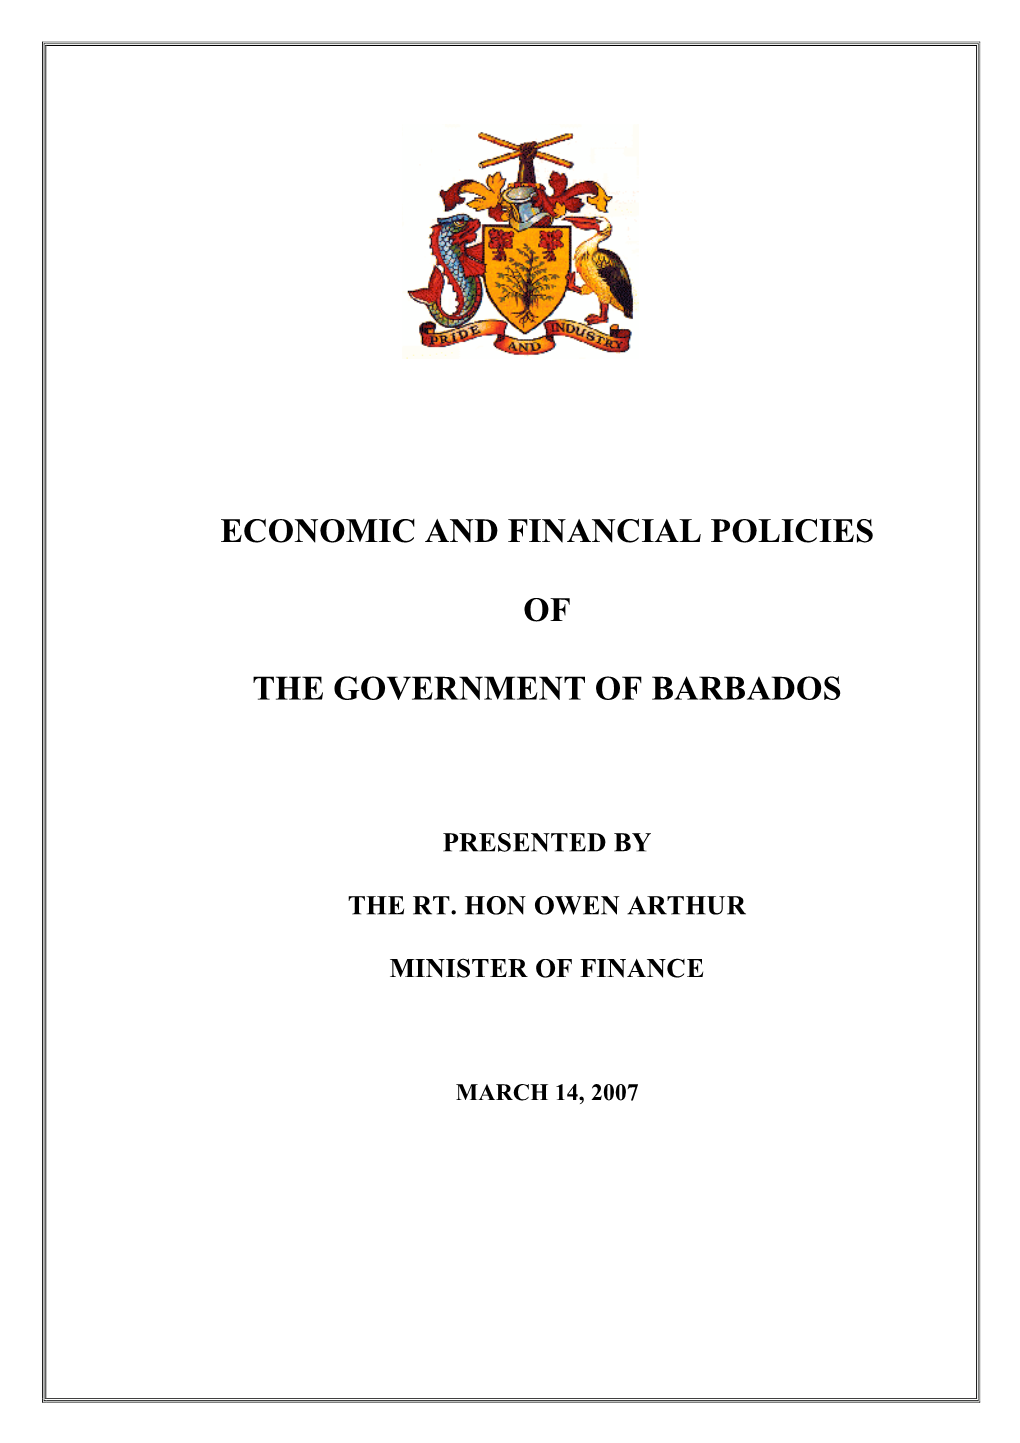 Economic and Financial Policies of the Government